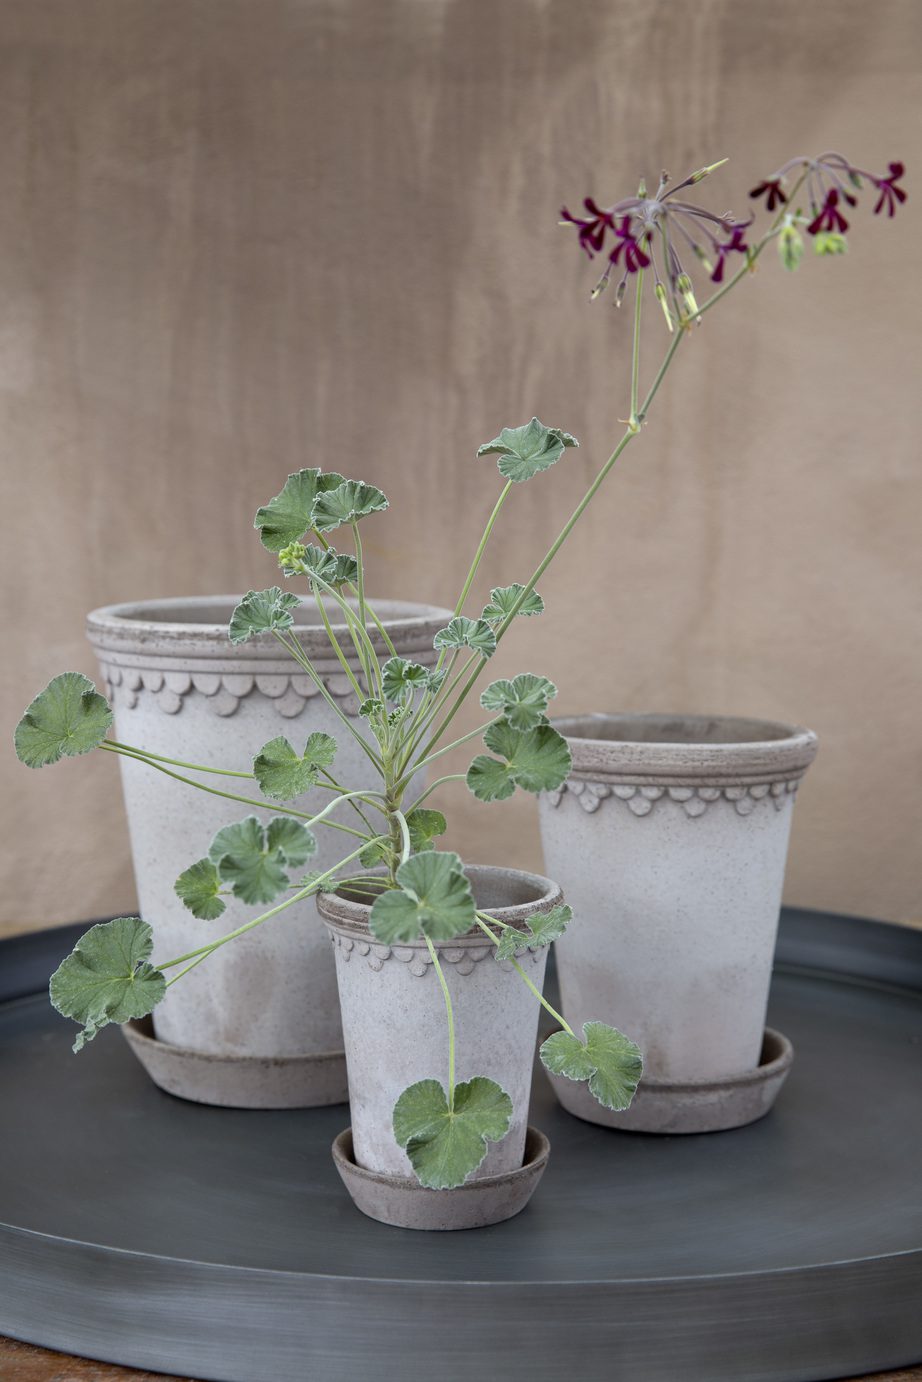 This classic and noble plant pot – Københavner – is inspired by pottery made at the Royal Danish Palace of Fredensborg in 1860.